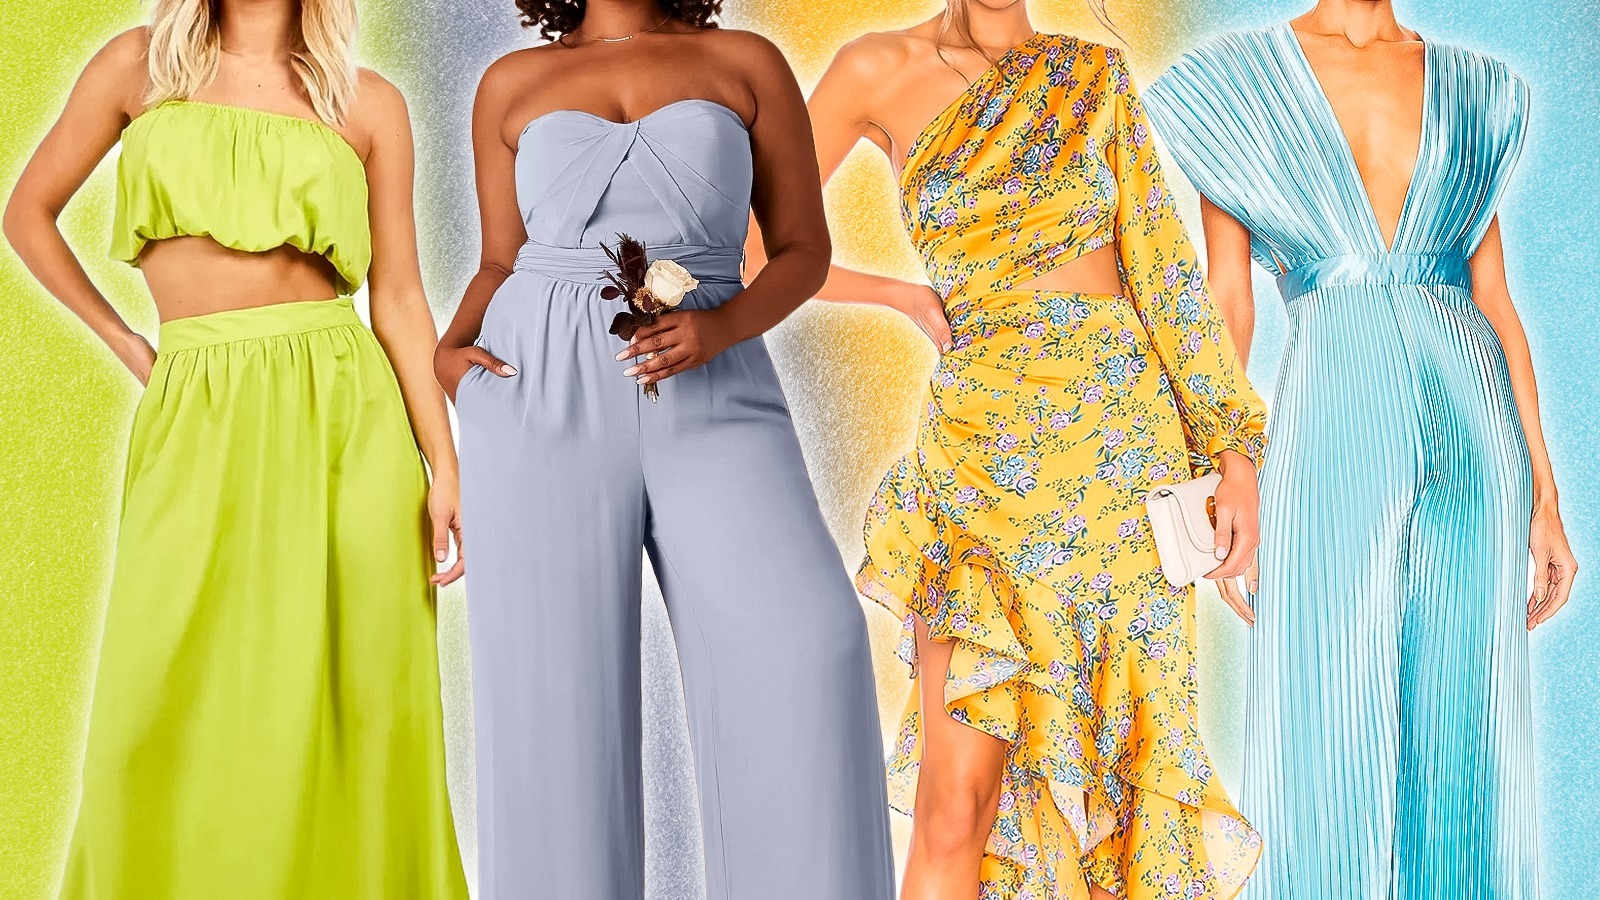 Bridesmaid Fashion Is Undoubtedly Bolder And Brighter Than It Used To Be